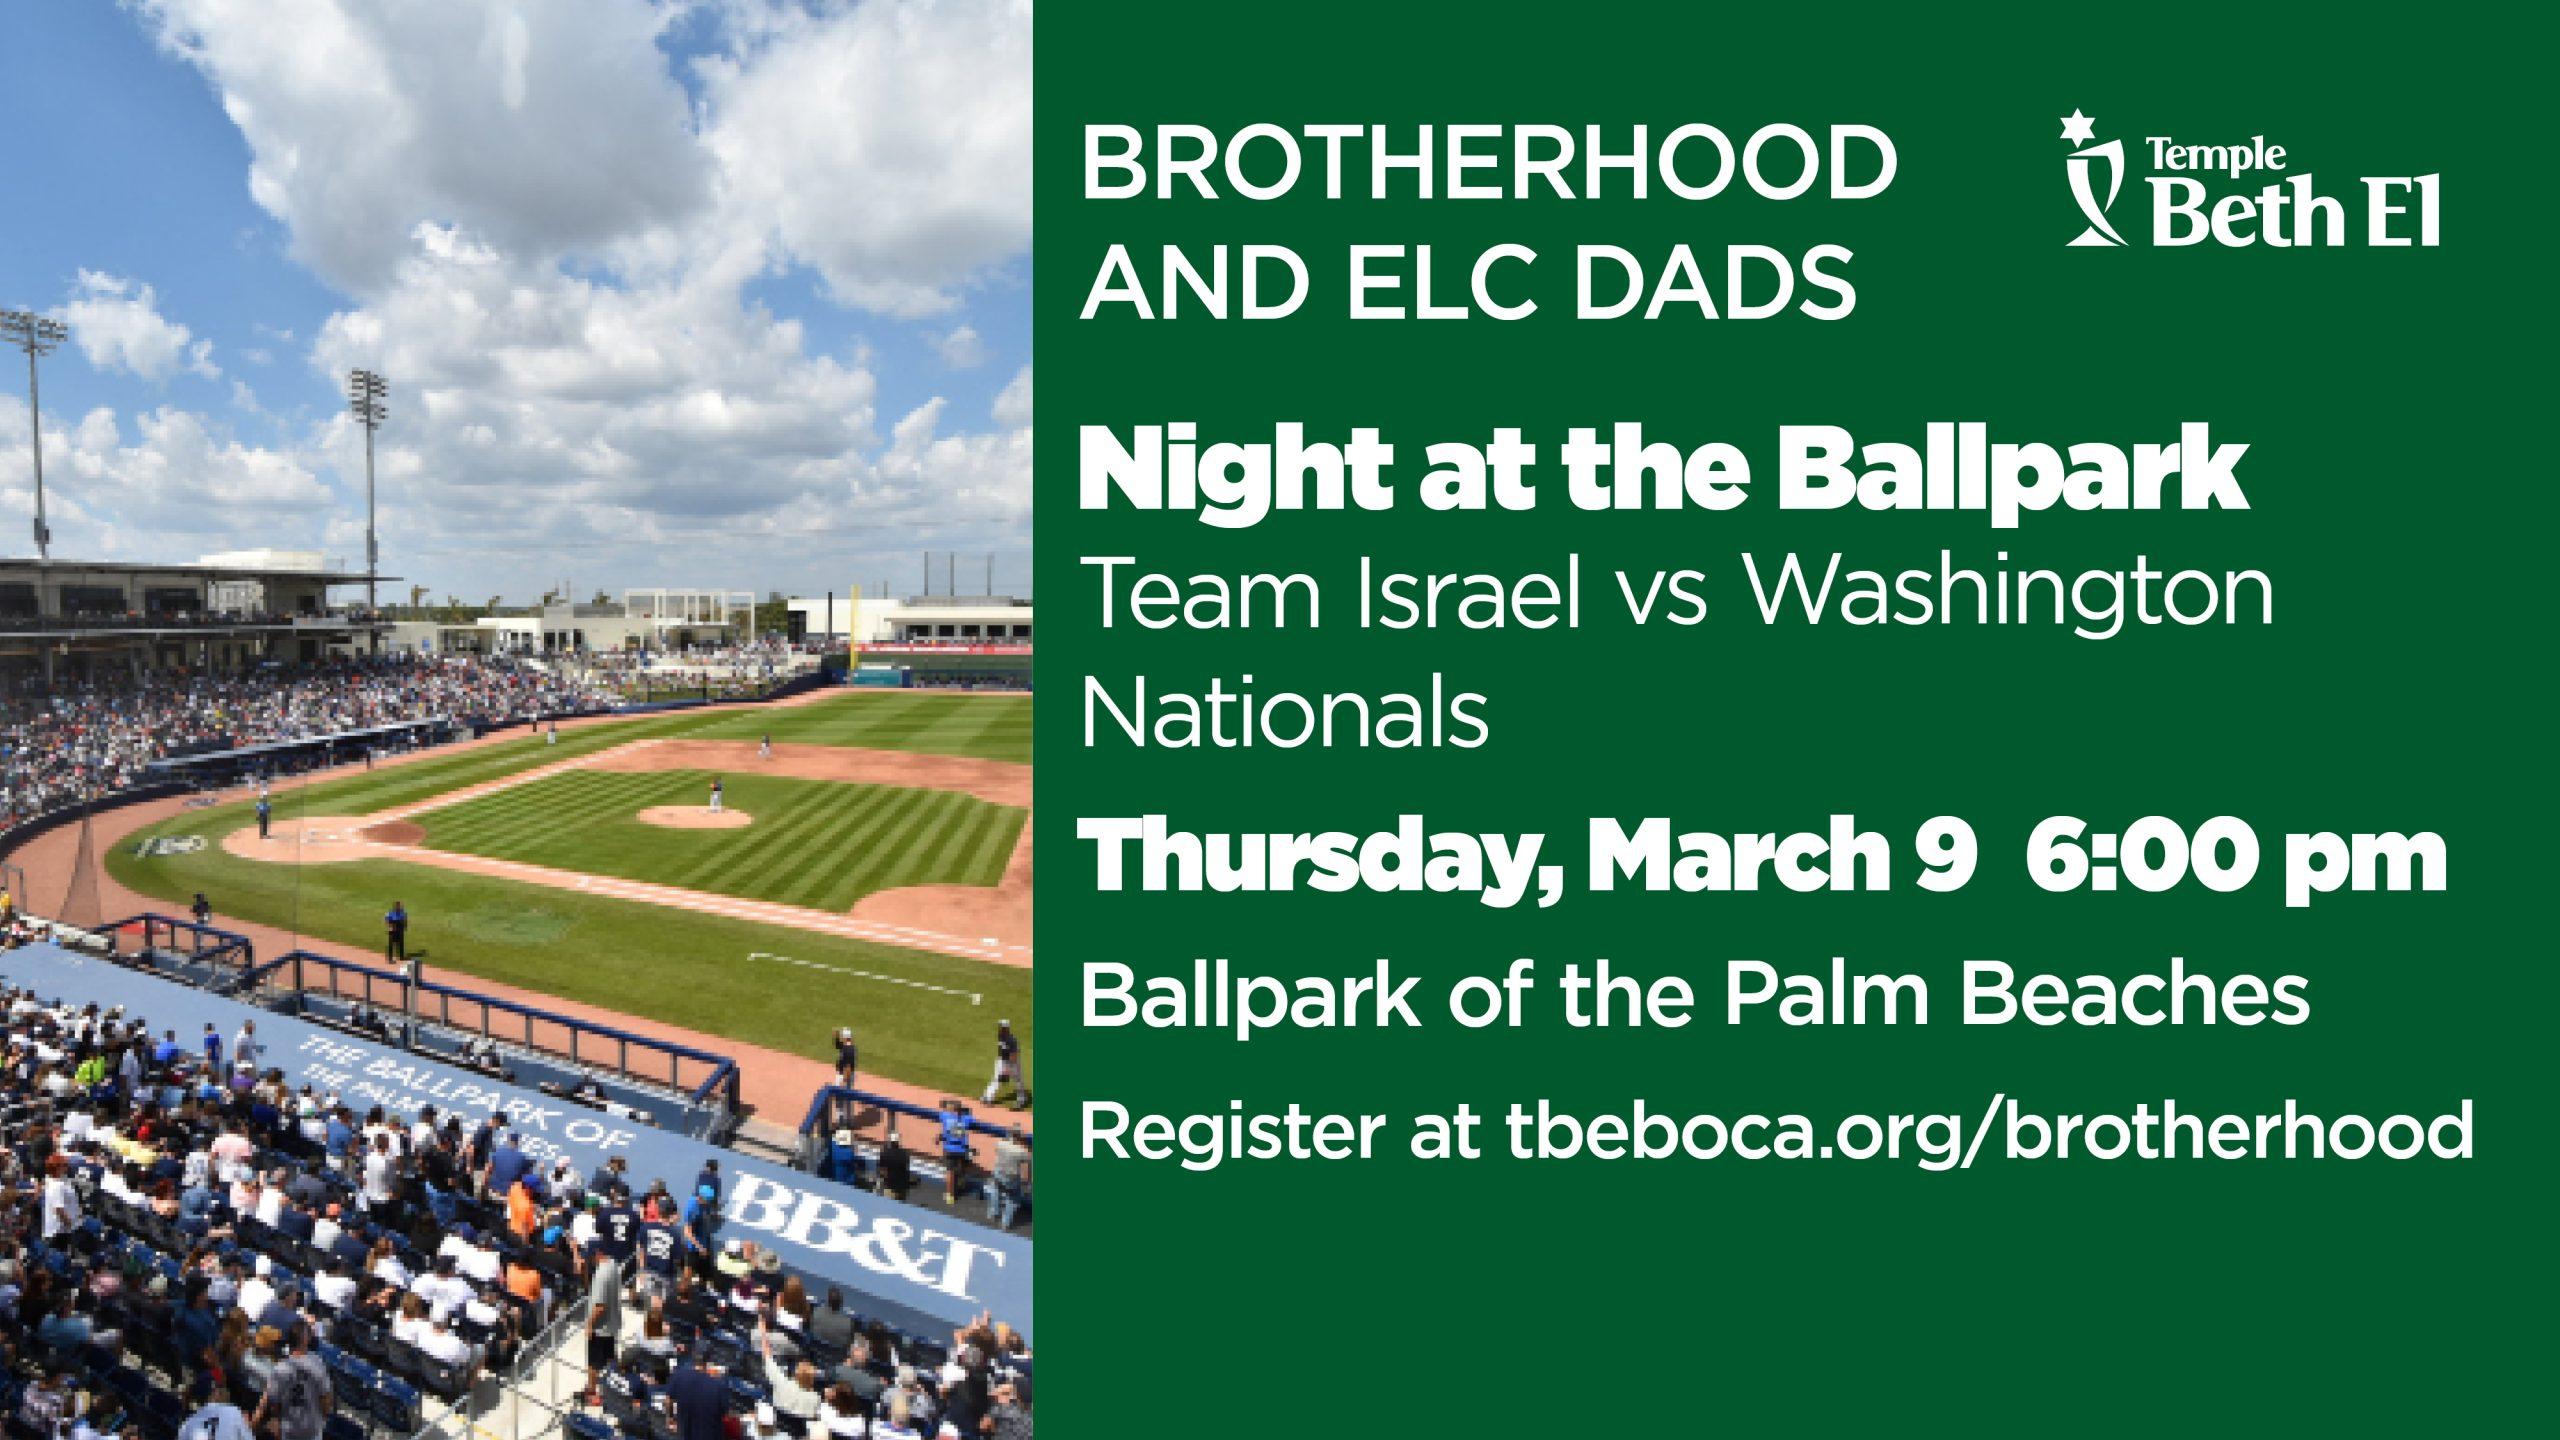 Brotherhood Night at the Ballpark event graphic with Temple Beth El of Boca Raton